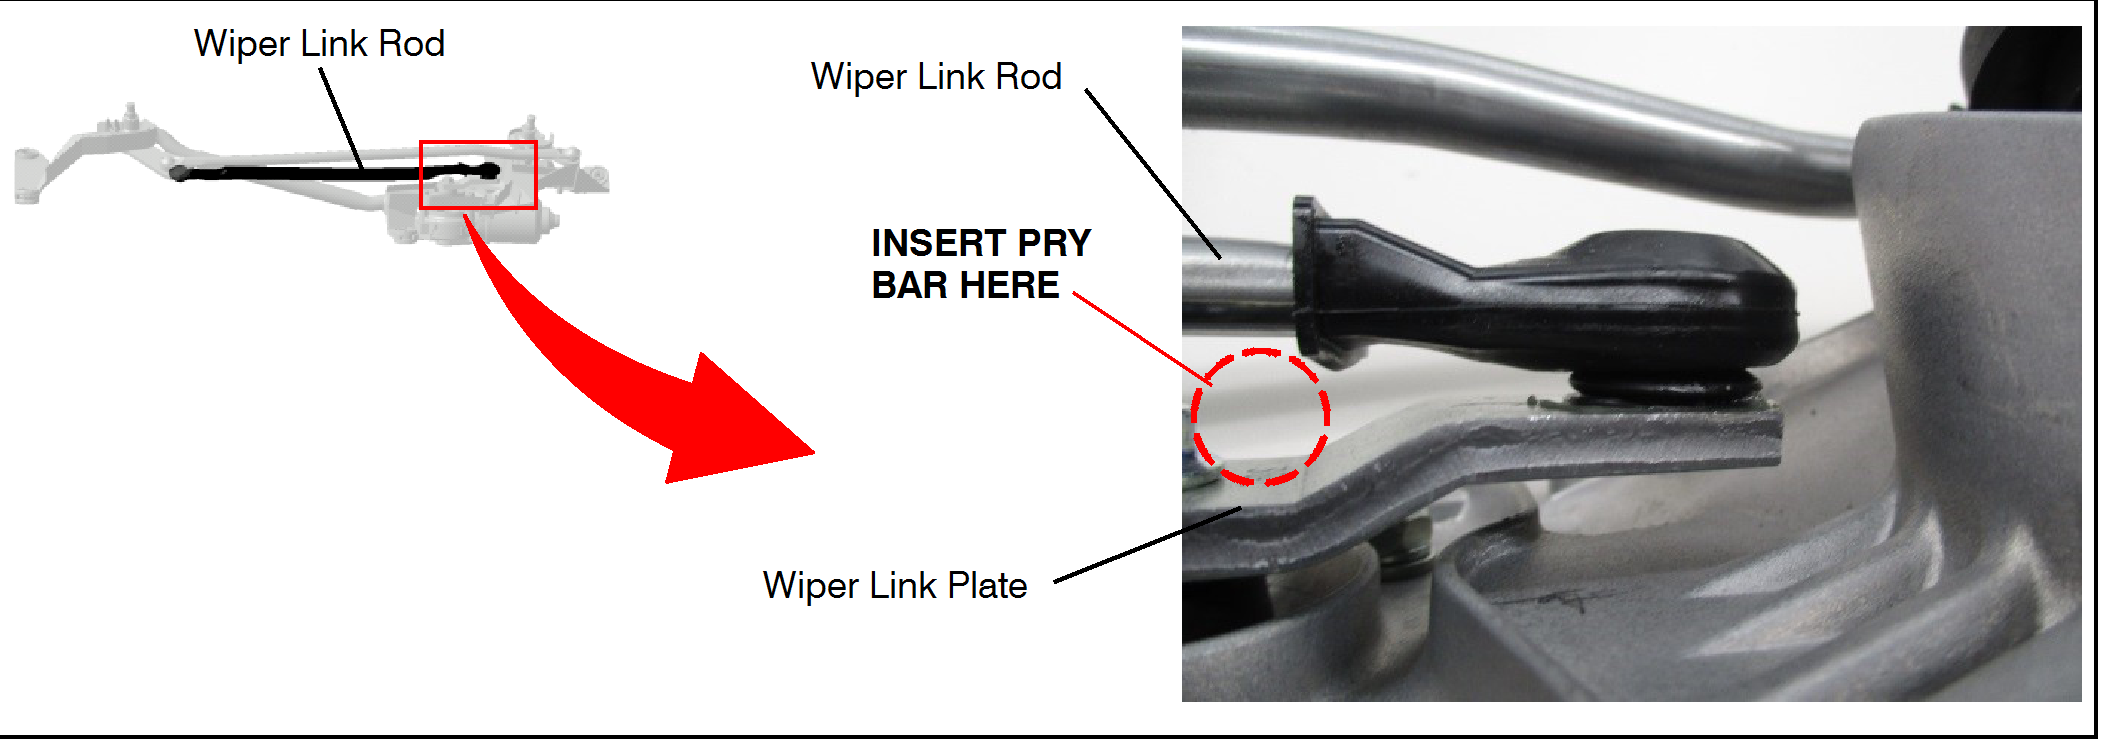 Use a pry bar or similar device to separate the wiper link rod from the wiper link plate